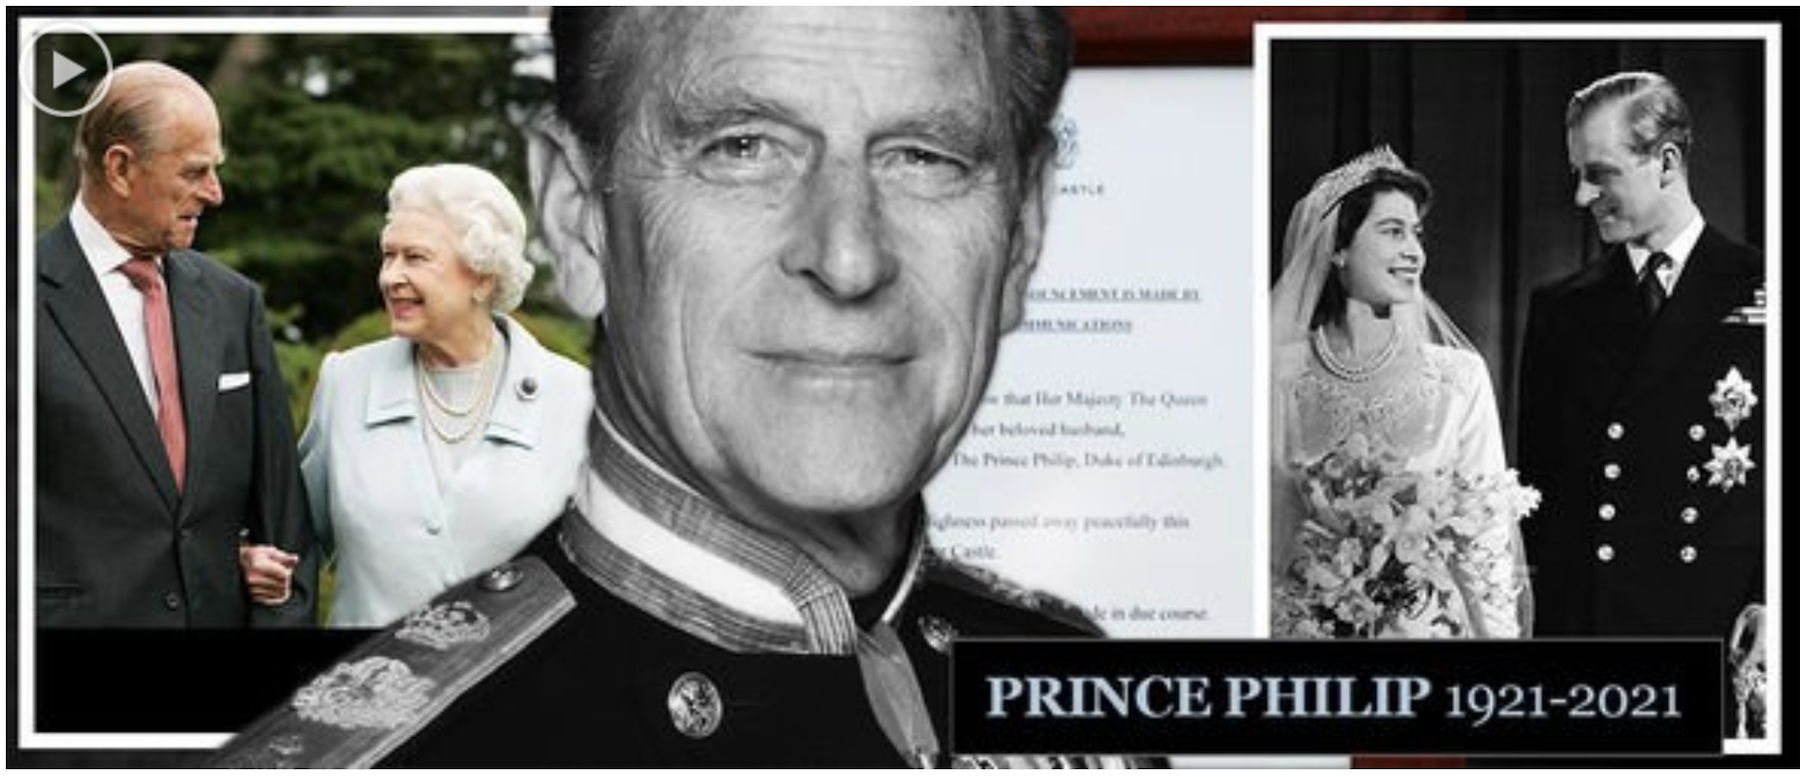 Prince Philip, Duke of Edinburgh, 1921-2021. World in grief with flags flown at half mast